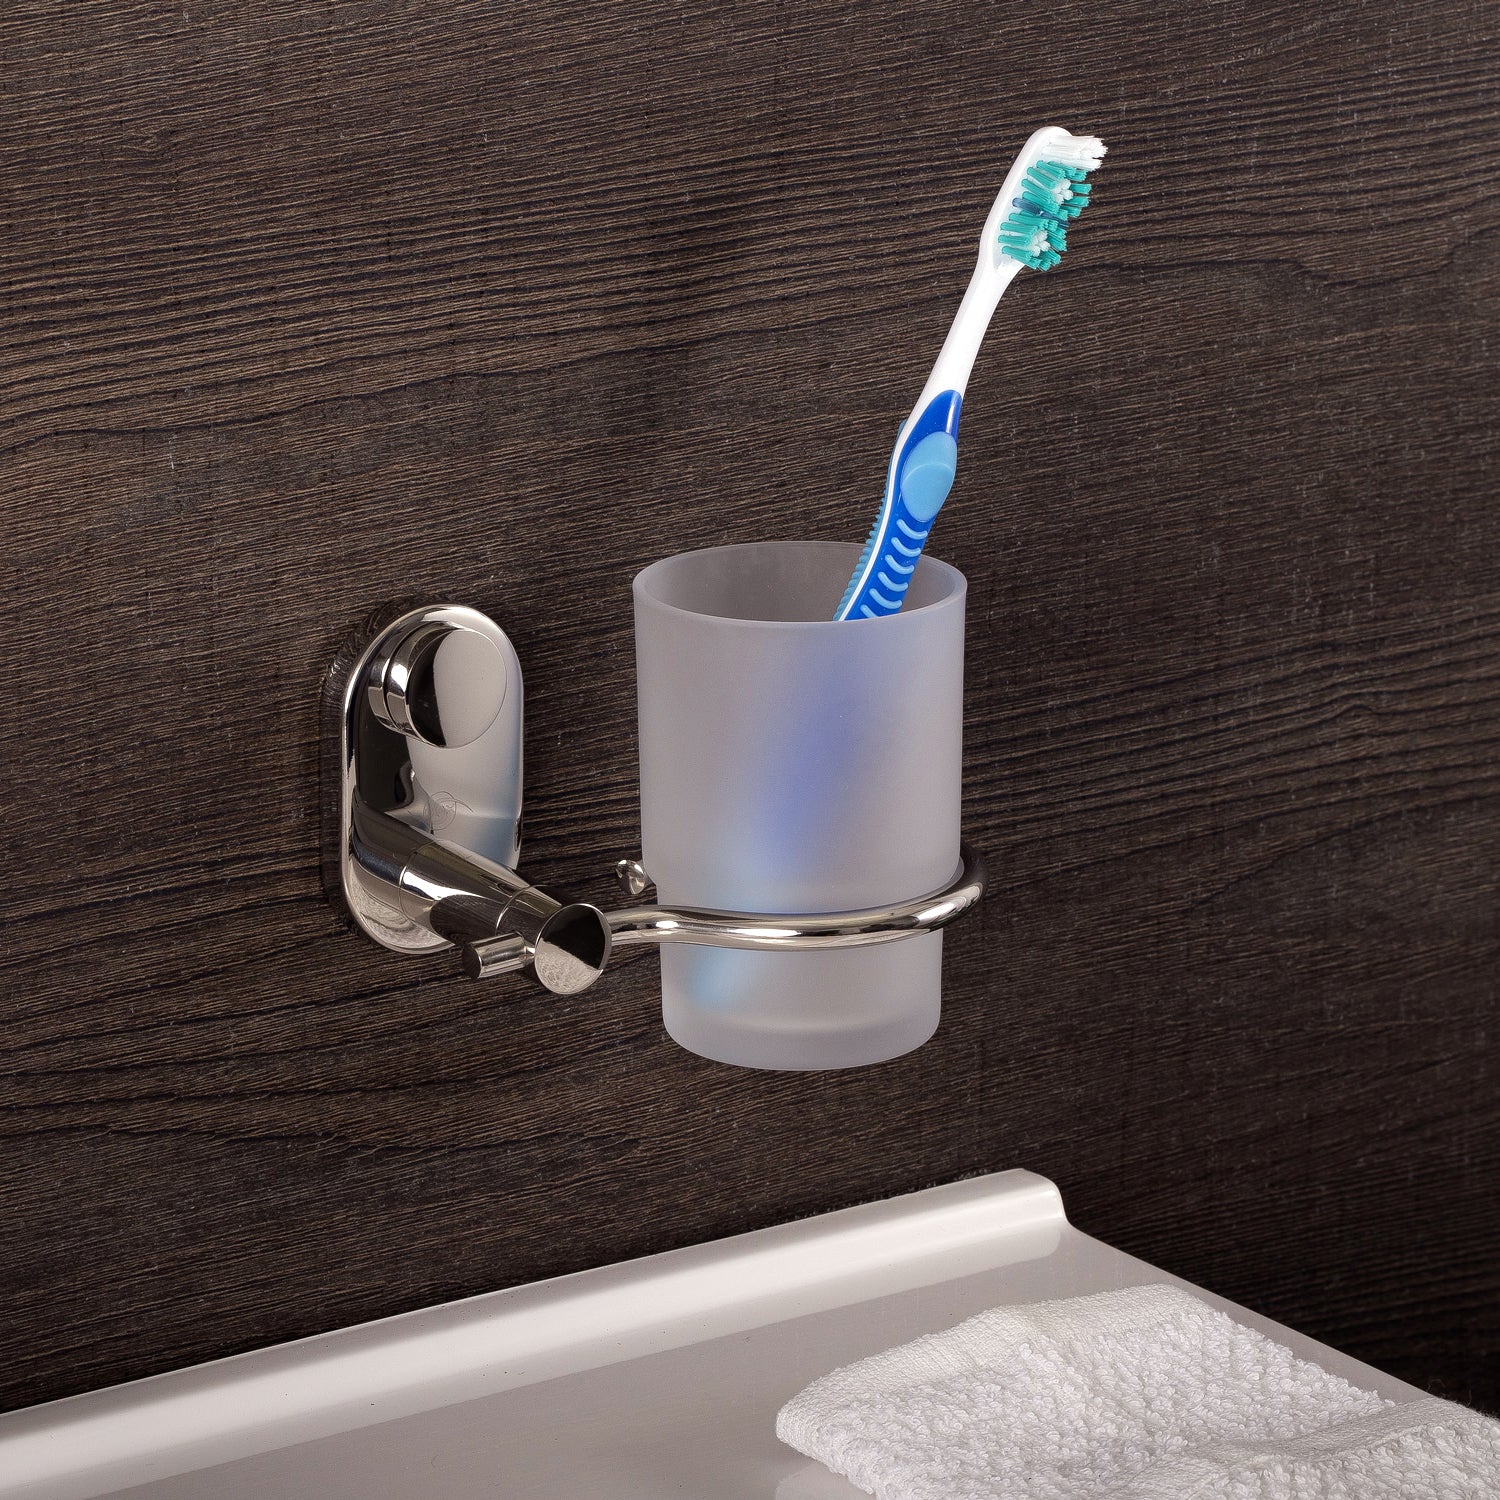 DAX Bathroom Single Tumbler Toothbrush Holder, Wall Mount Stainless Steel with Glass Cup, Satin Finish, 4-5/16 x 3-3/4 x 4-1/8 Inches (DAX-G0206-S)